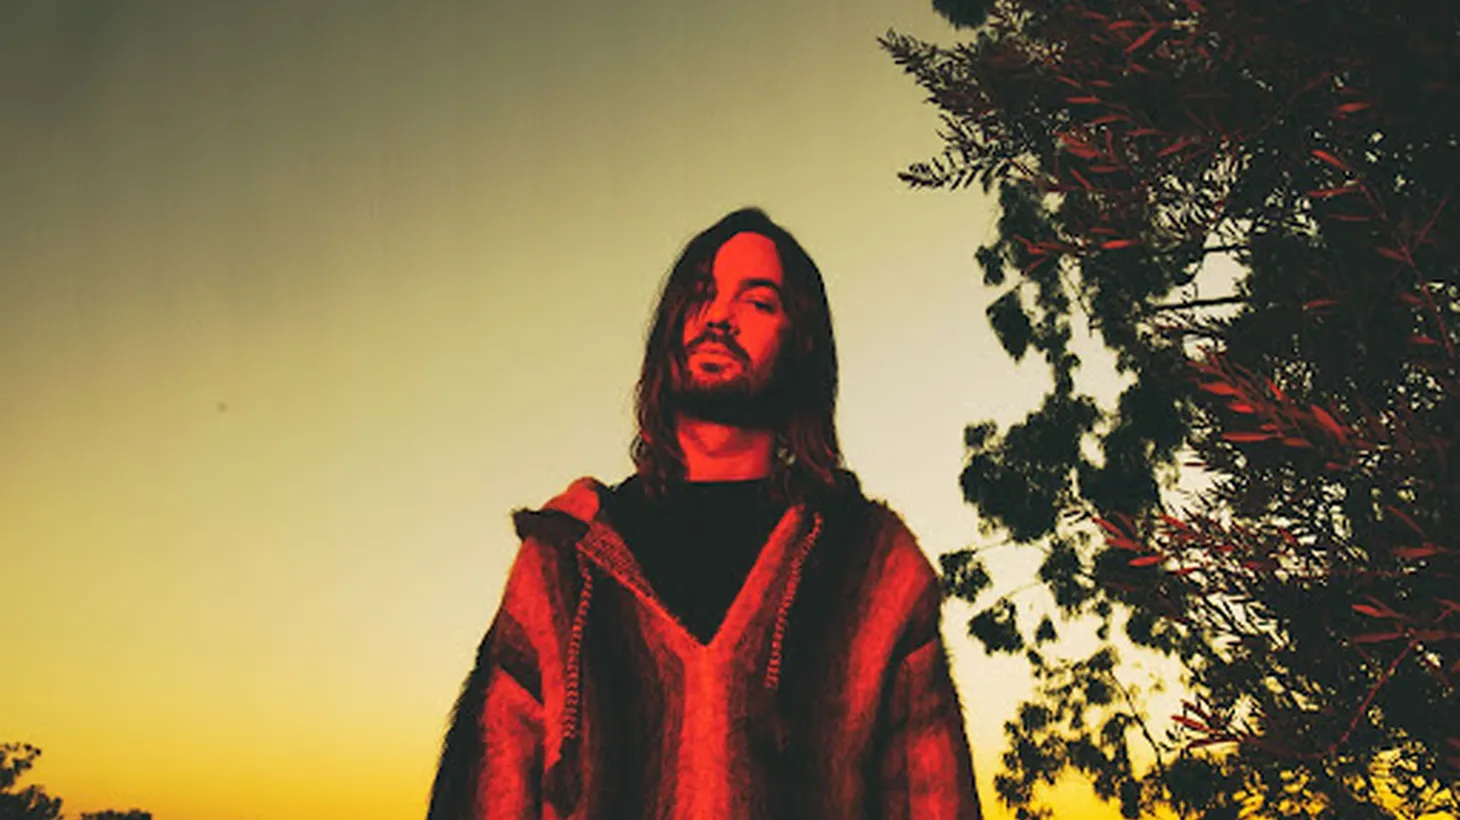 Tame Impala exemplifies the slow build approach to chart dominance.